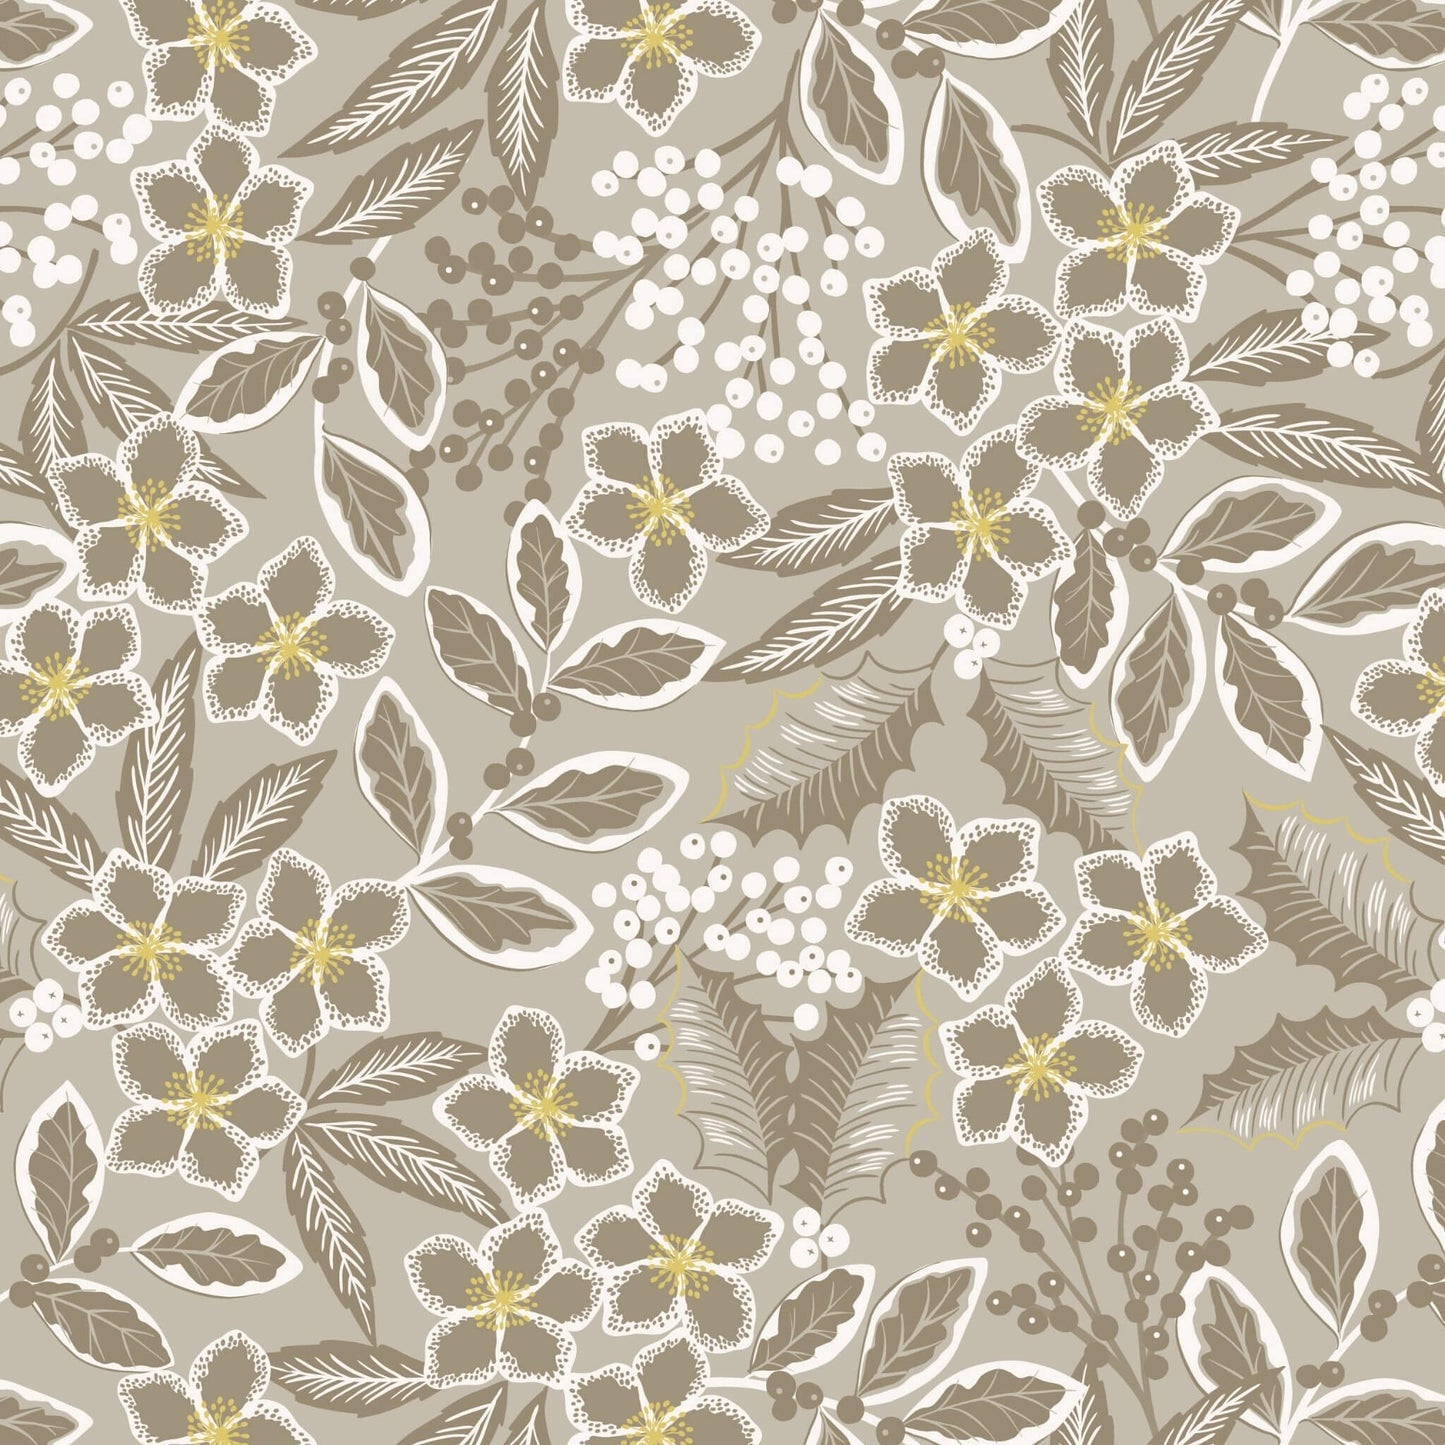 Noel Floral with Gold Metallic - Noel Christmas Fabric Range - Lewis and Irene - Natural